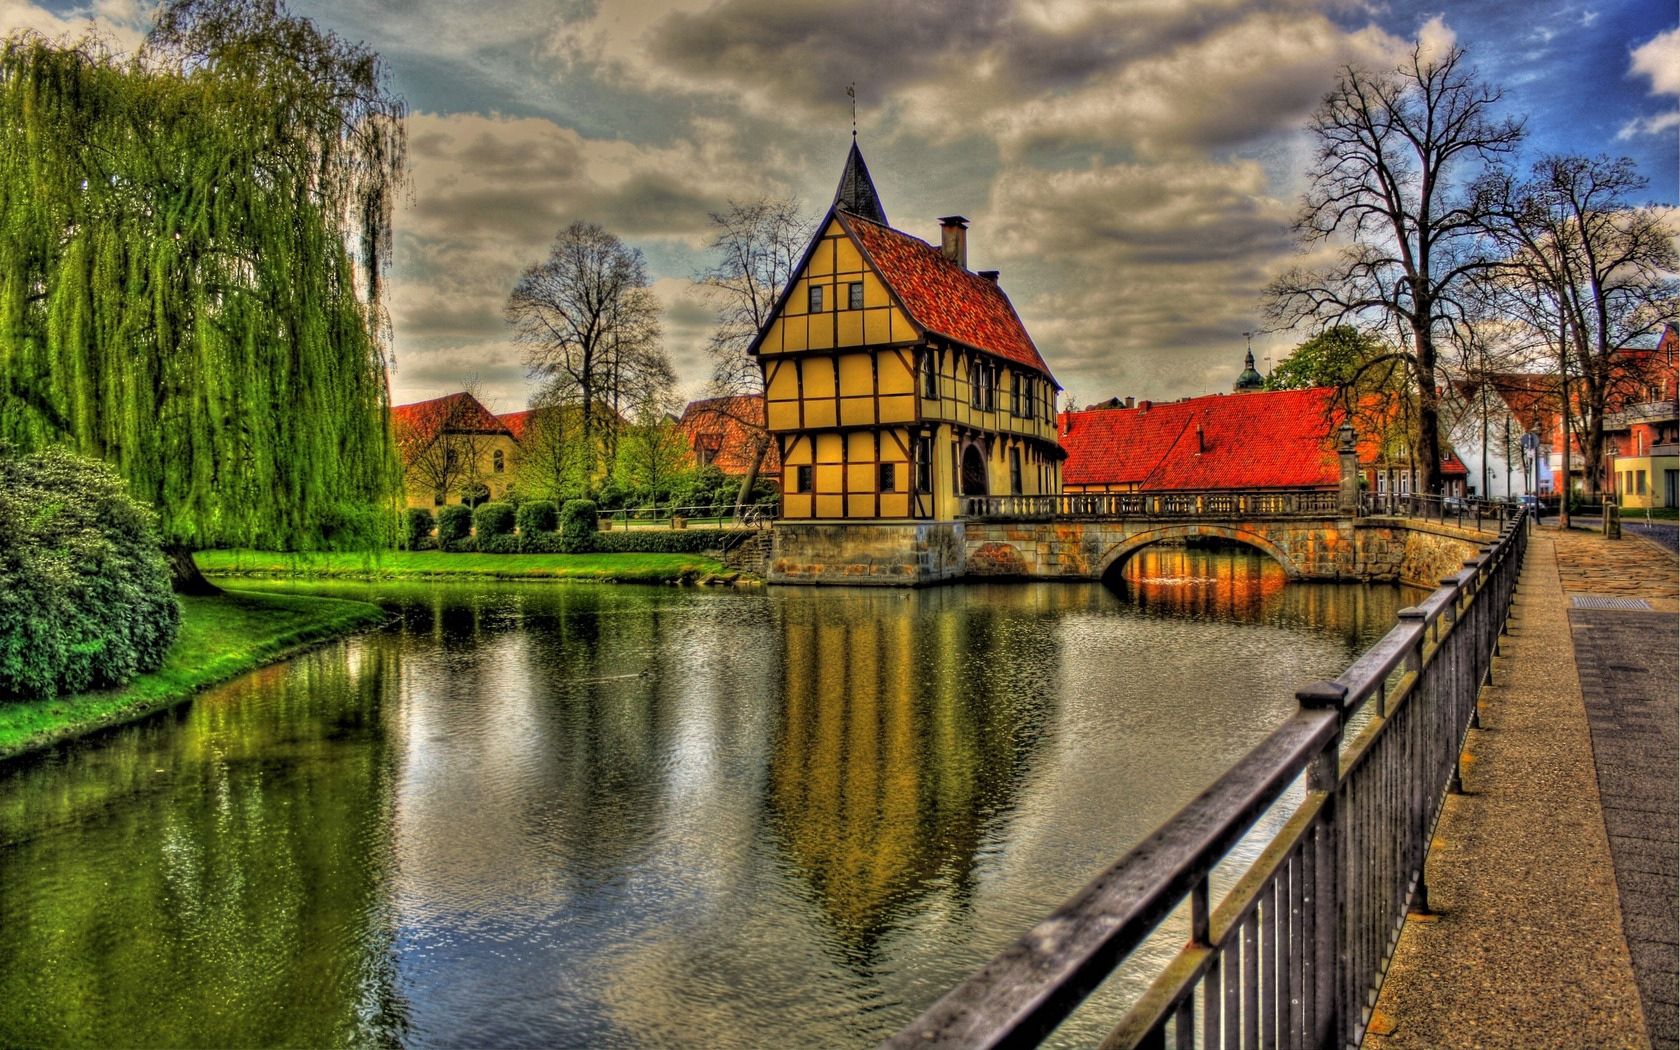 architecture, hdr, cities, rivers, germany, grass, trees, green, water, houses, sky, clouds, city, reflection, road, beauty, house, bridge, colors, color, view, colorful